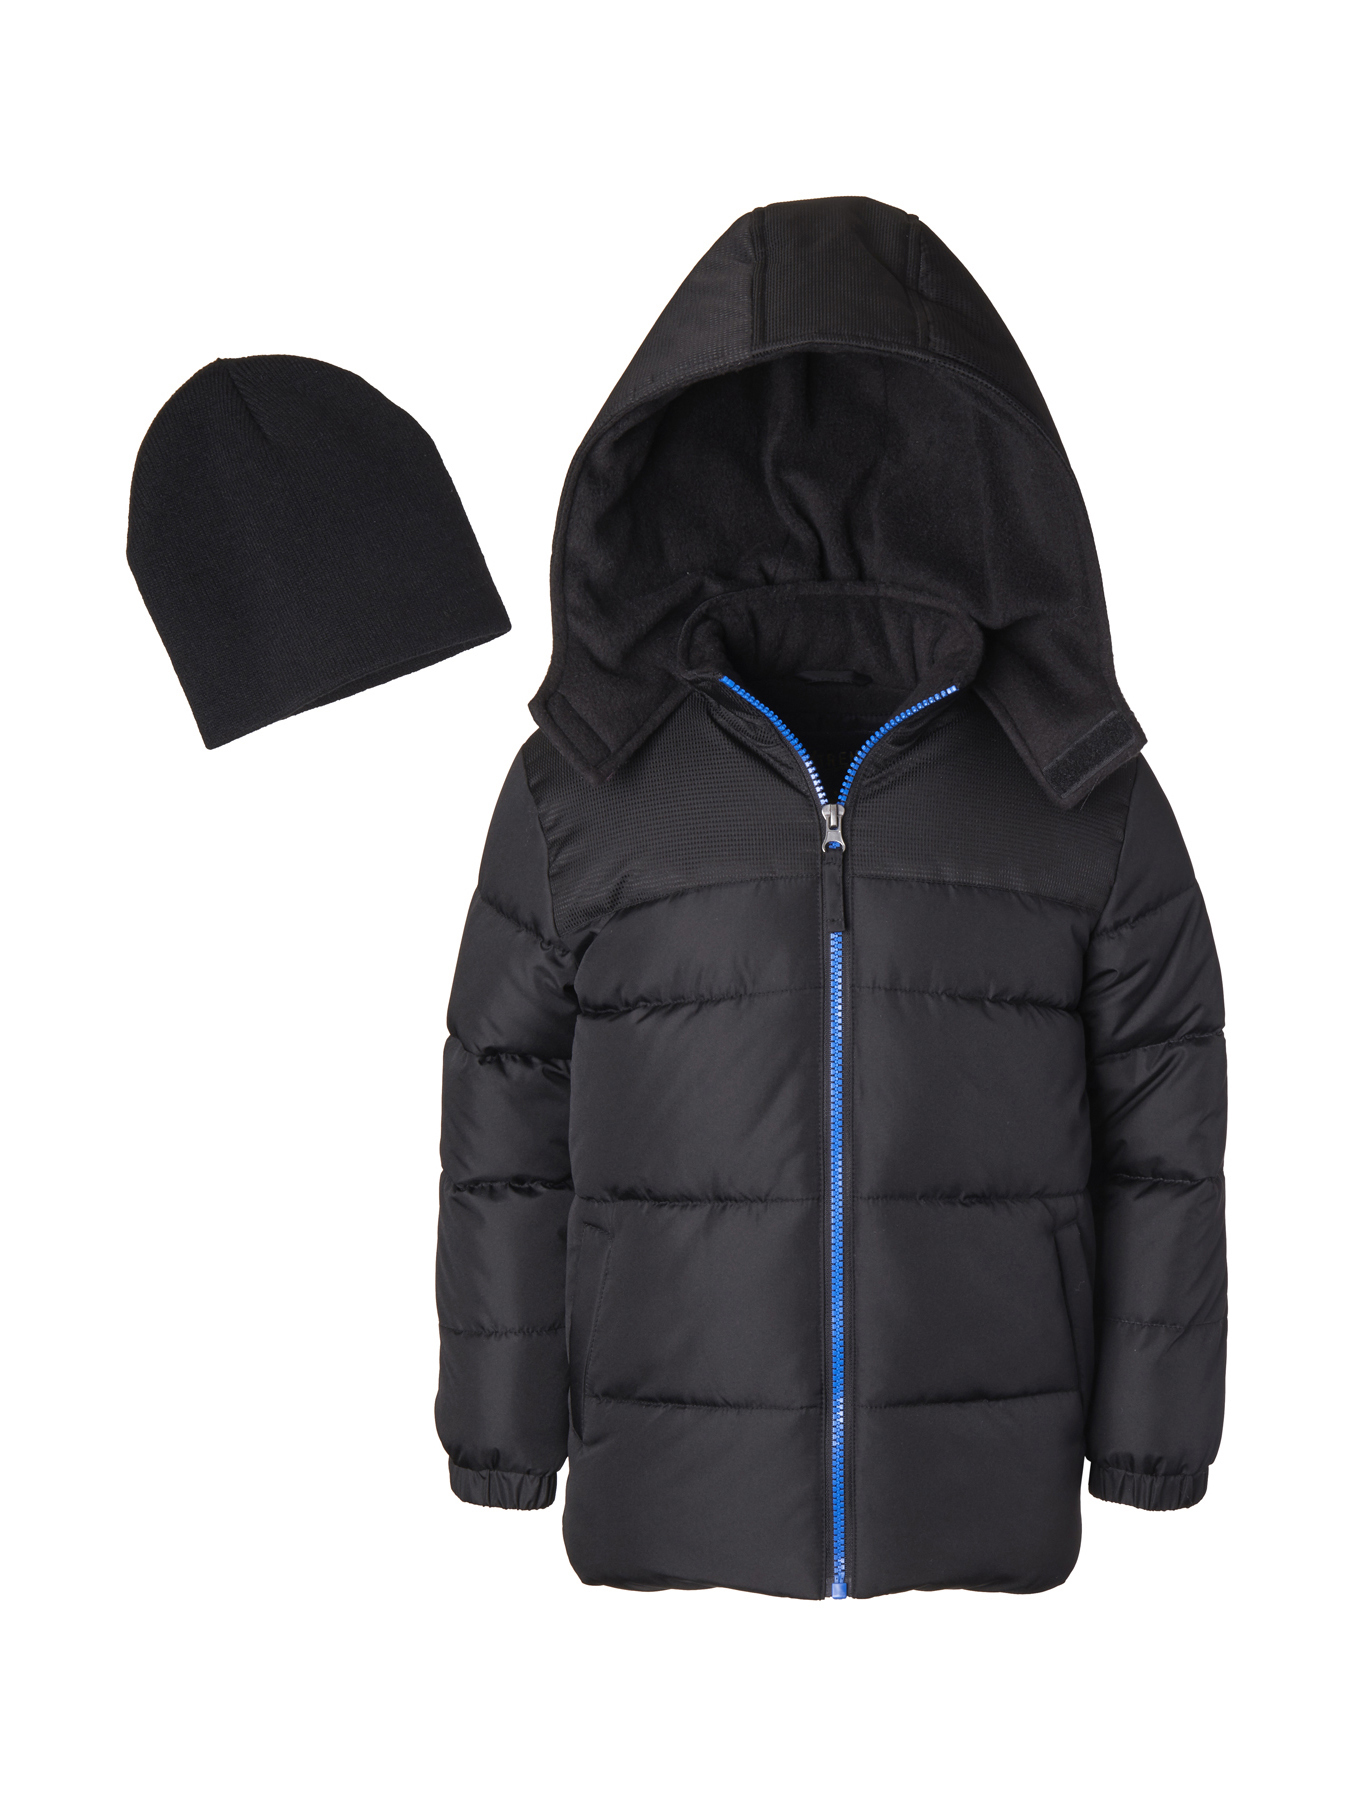 Puffer Jacket with Buffalo Check Hood - Free Gift with Purchase (Little Boys & Big Boys) - image 2 of 2